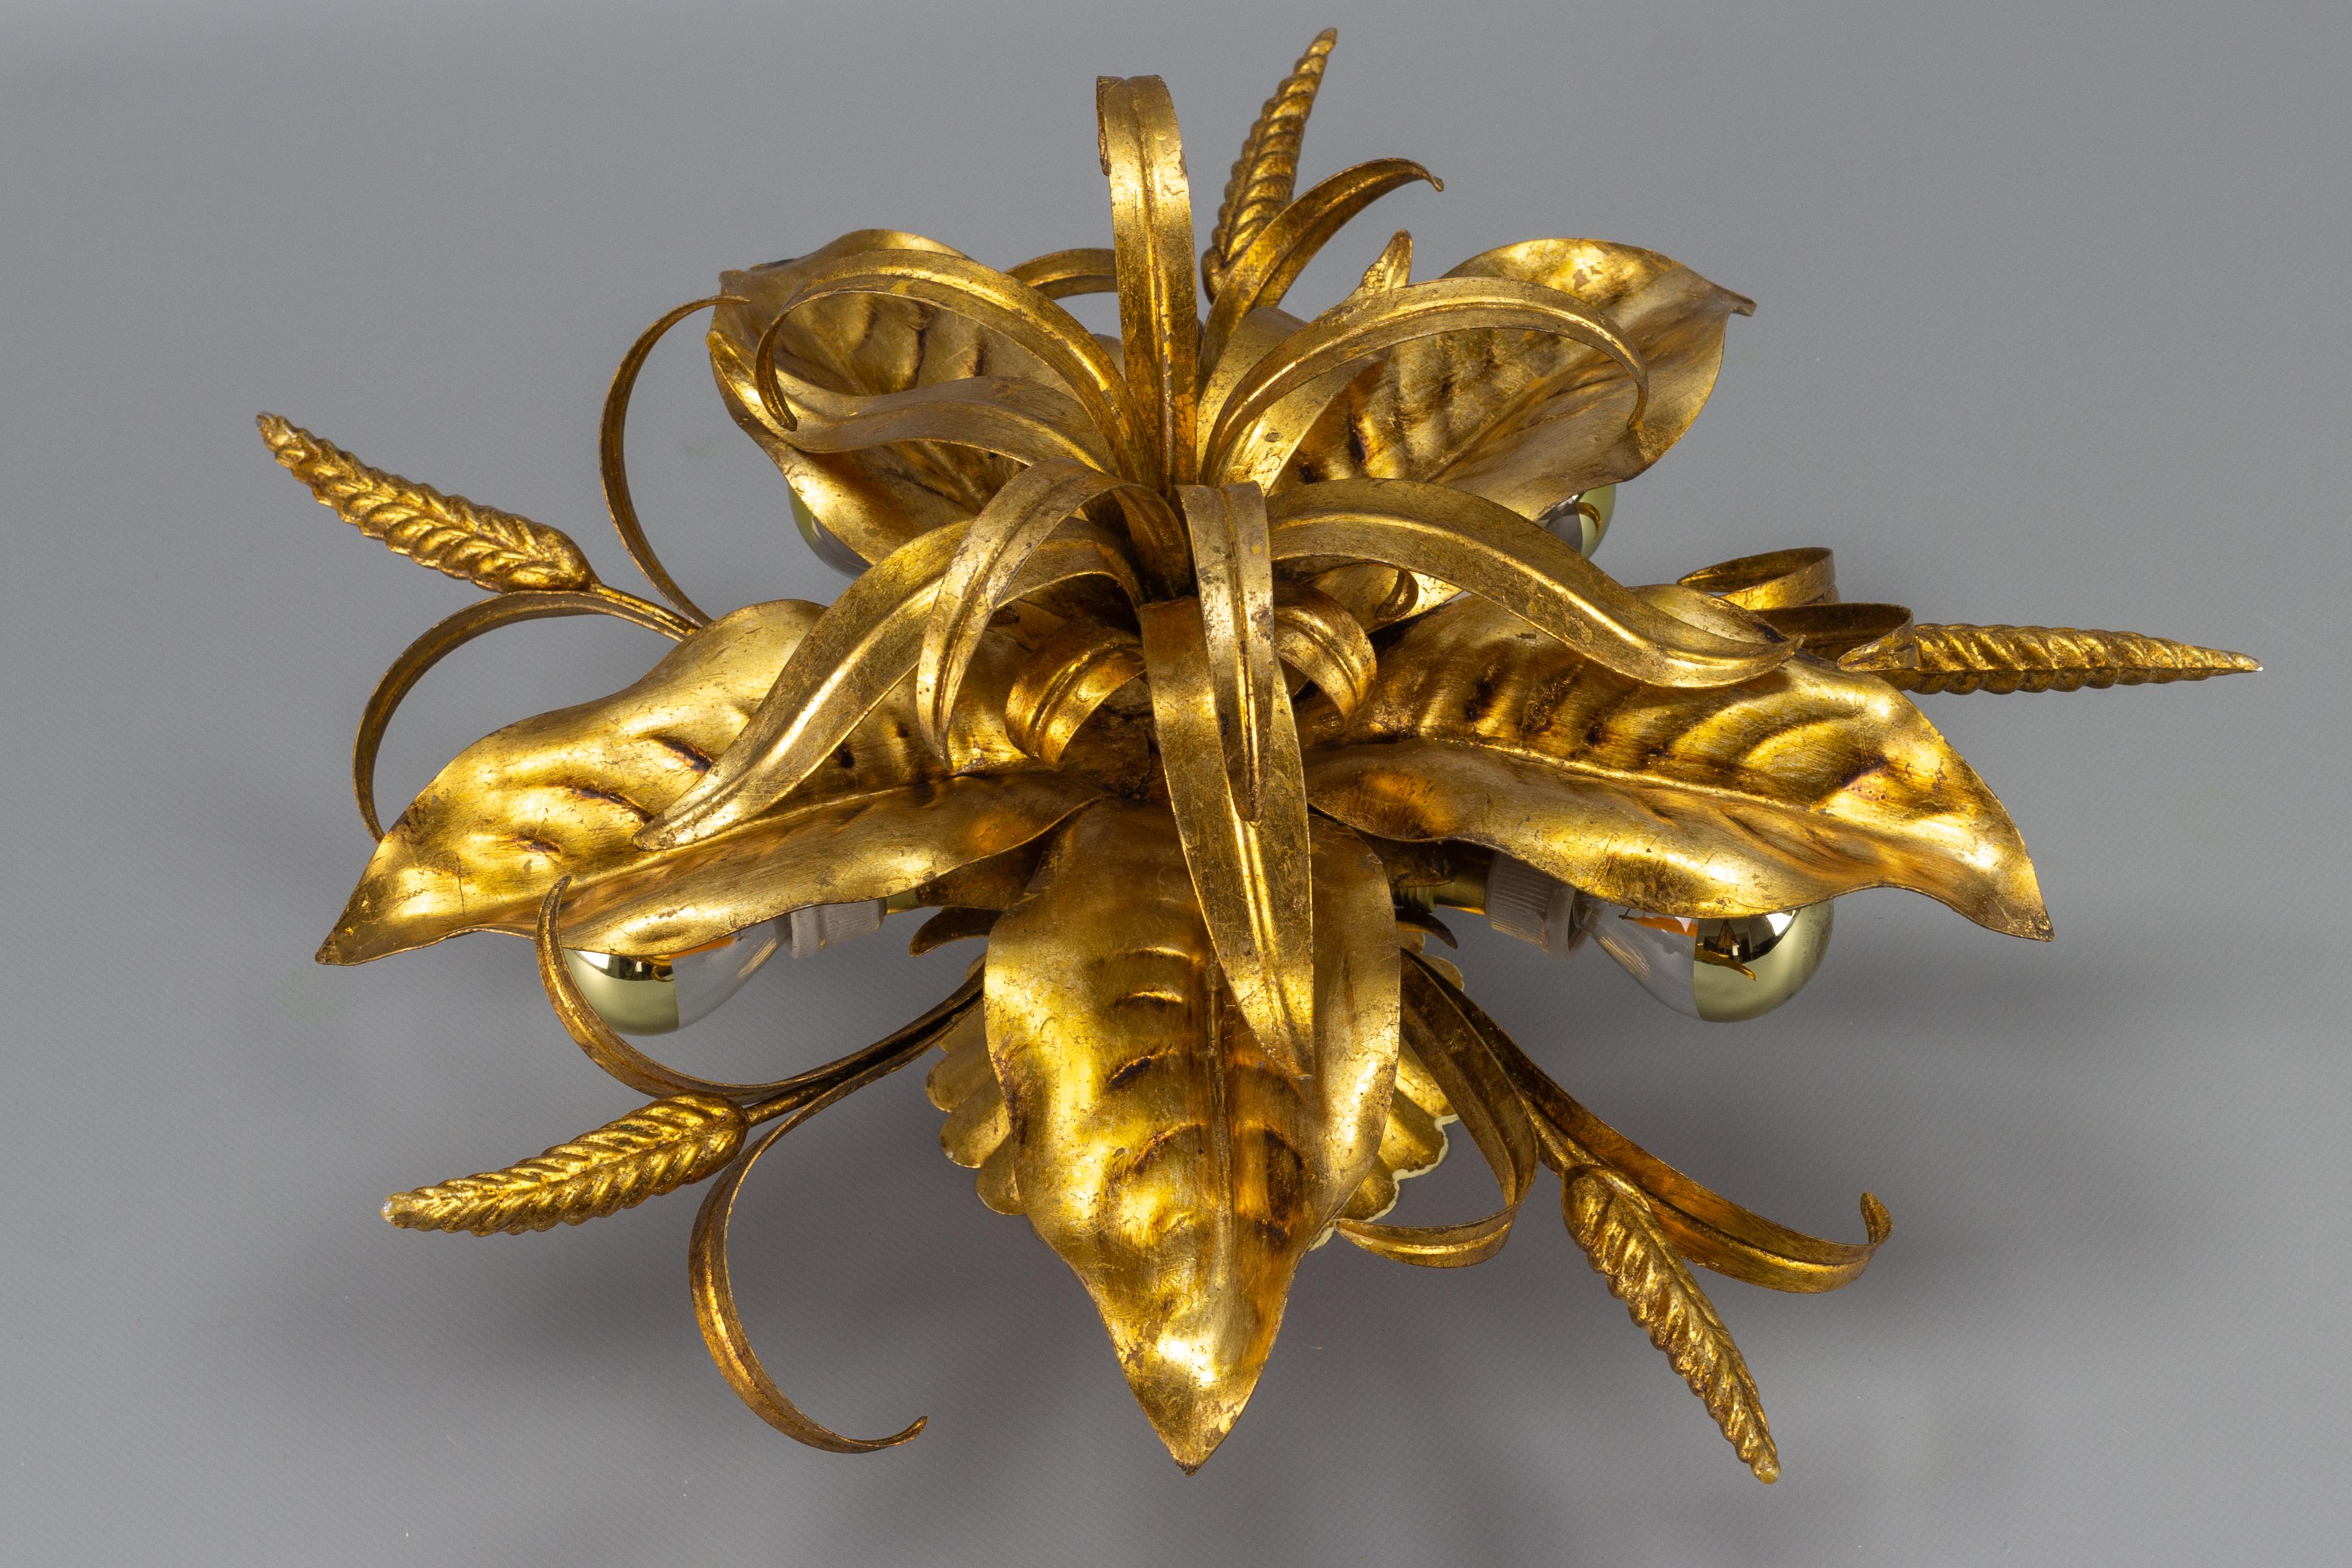 This adorable Hollywood Regency-style five-light gilt metal ceiling lamp features beautifully shaped leaves, wheat ears, and wheat leaves. 
Five hidden lights allow light to emit through stylized leaves, giving a warm background glow. A real